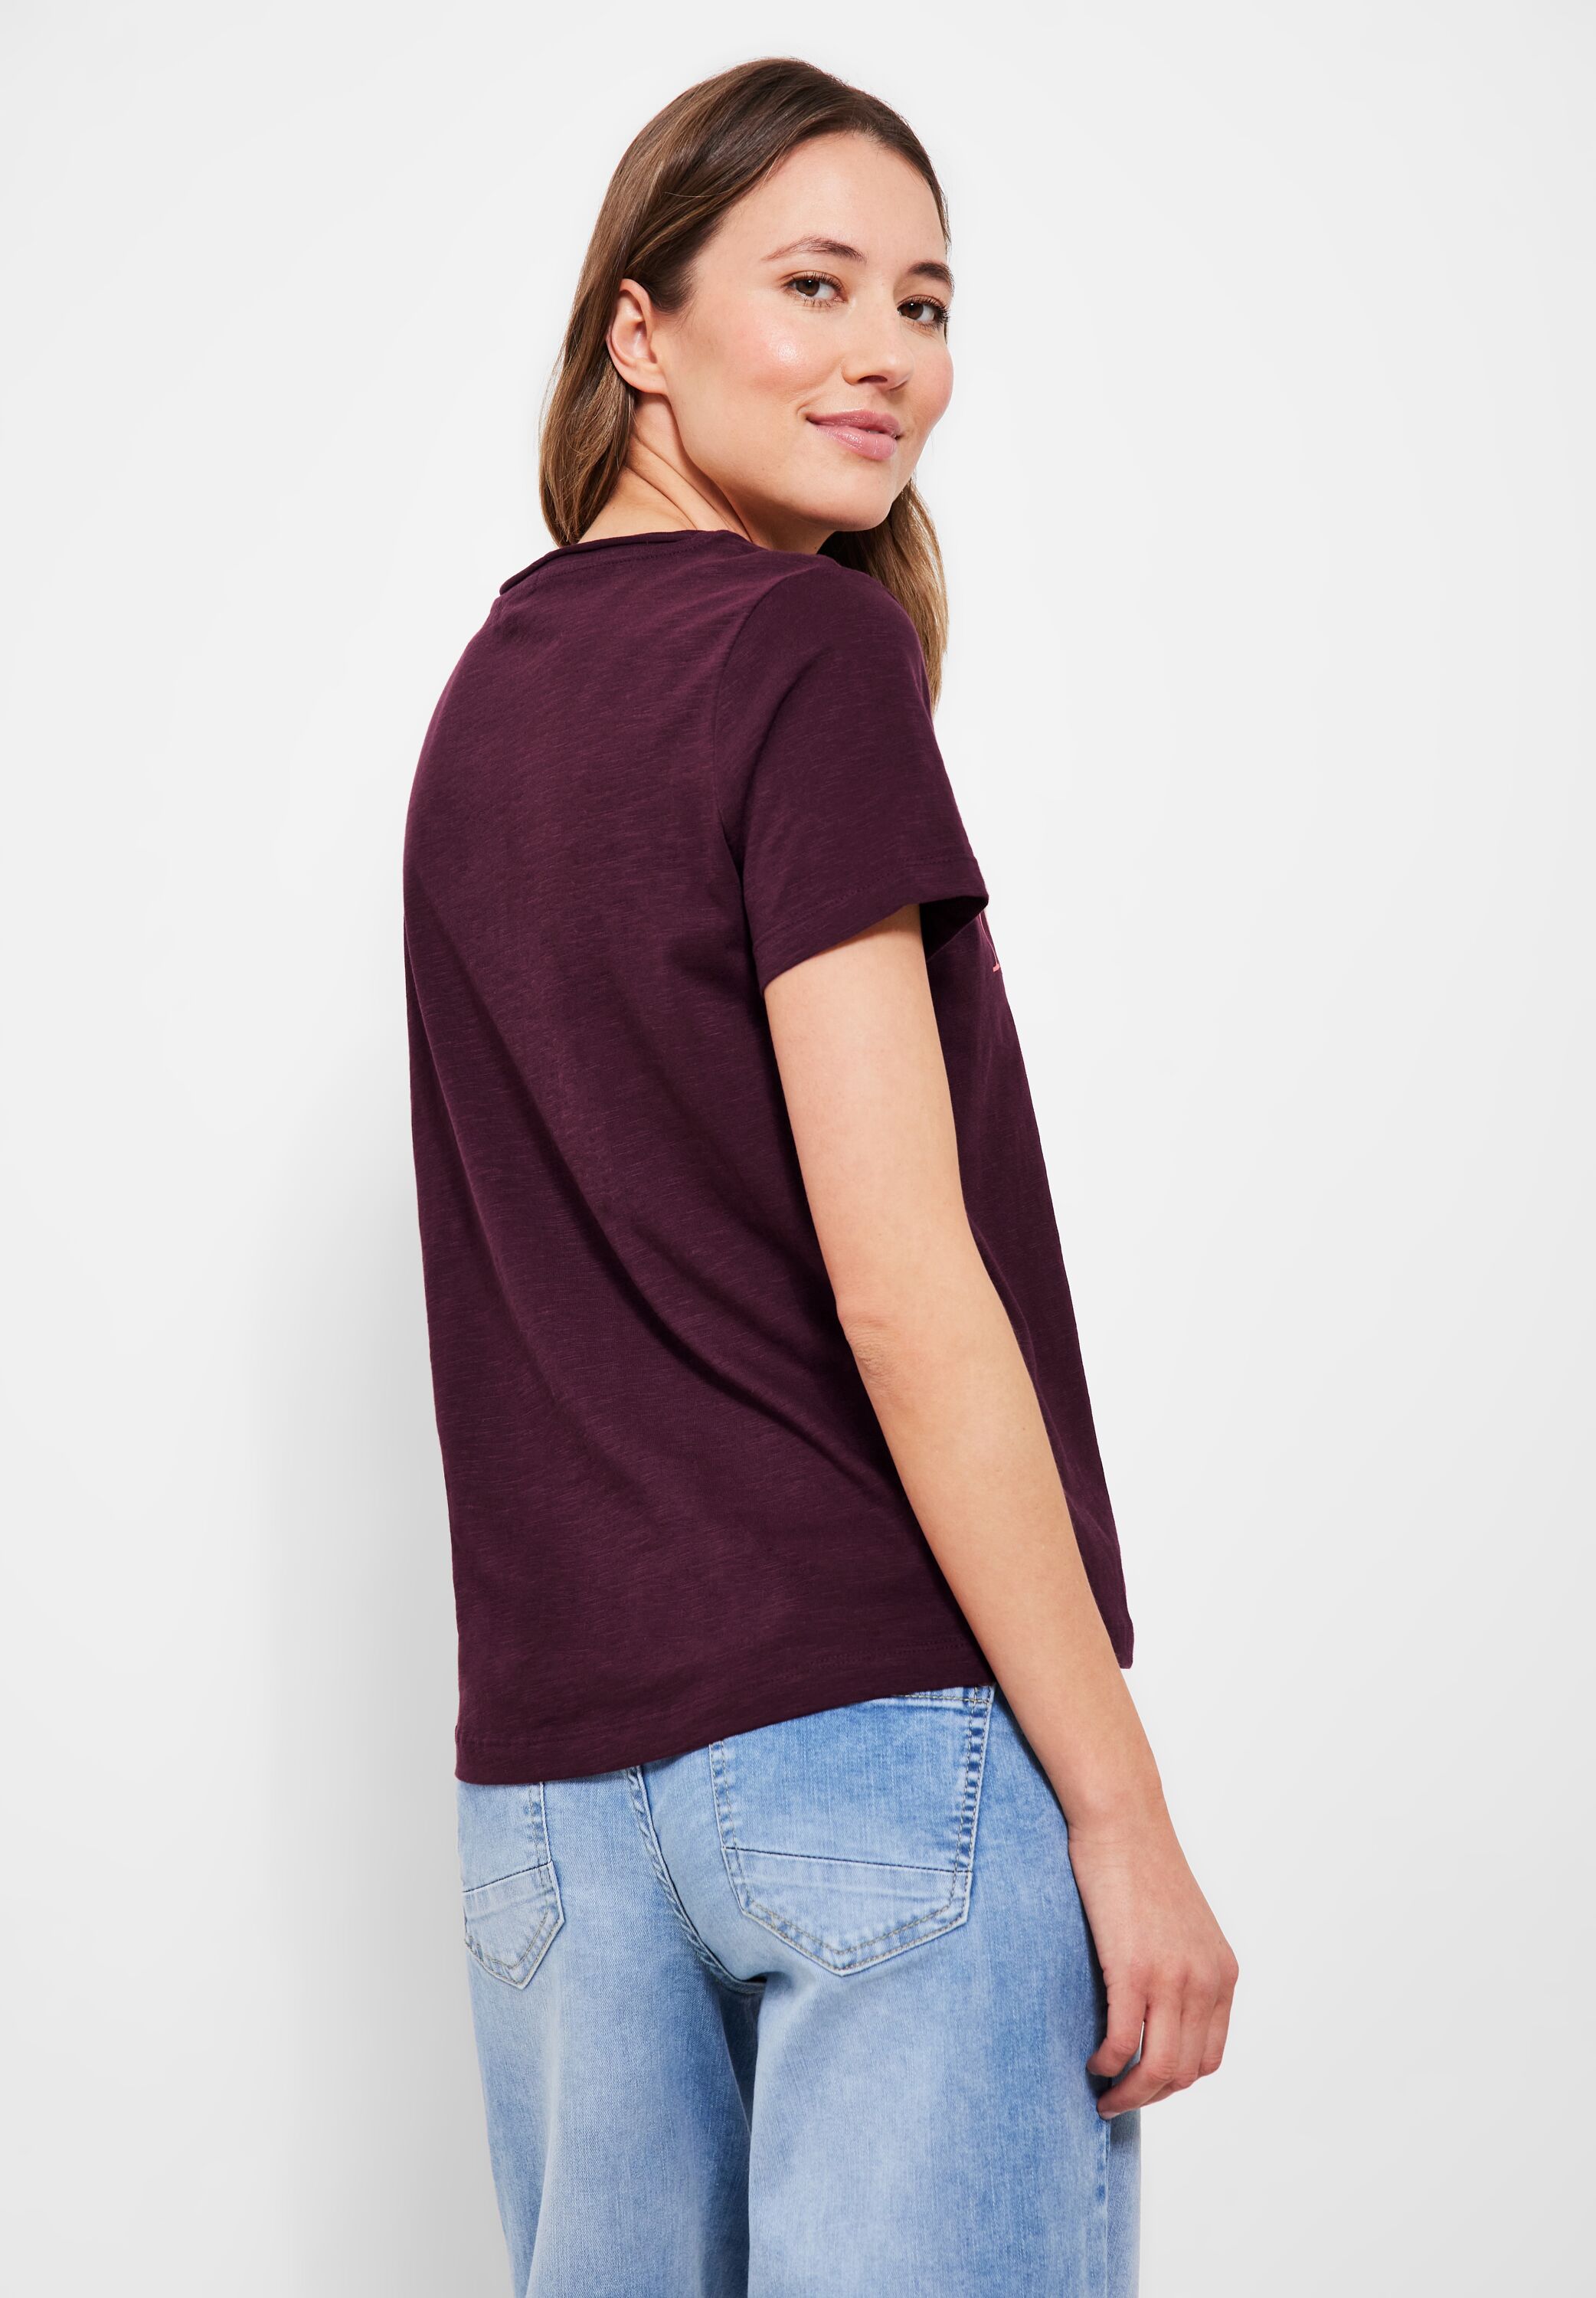 im CECIL B319637-34918 Mode SALE - reduziert T-Shirt Red CONCEPT Wineberry in